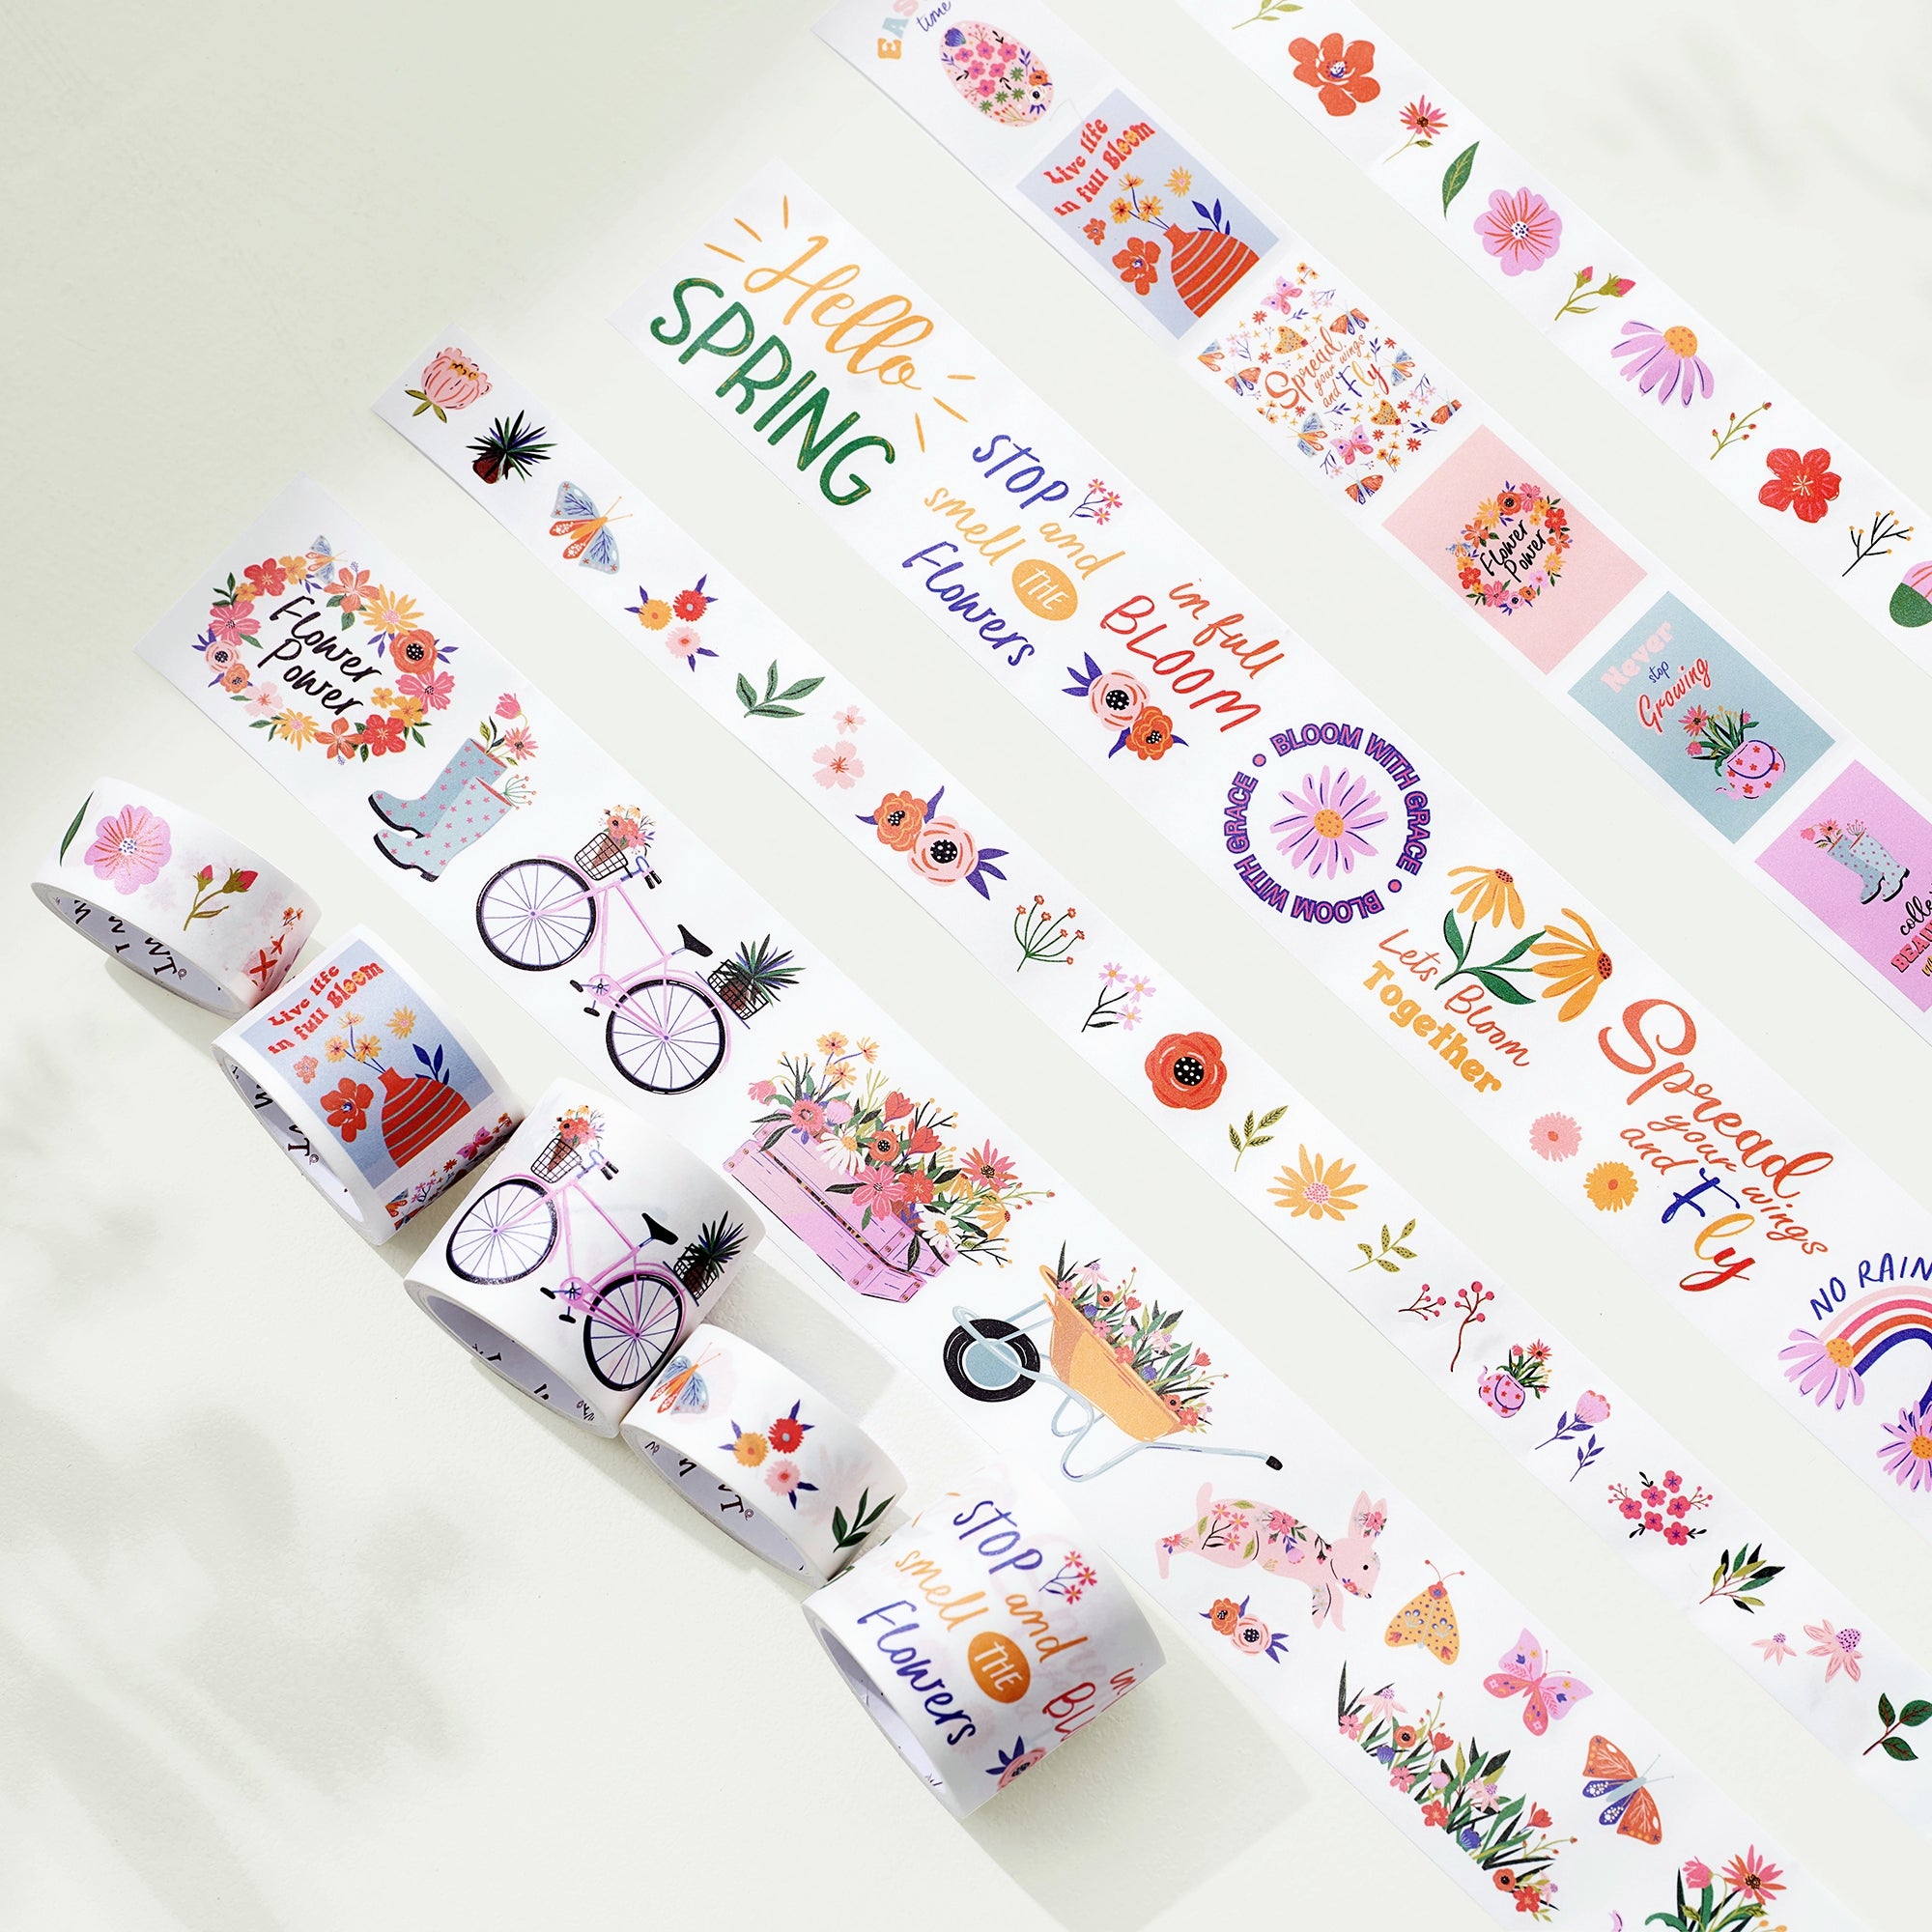 The Spring Gallery Washi Tape Sticker Set